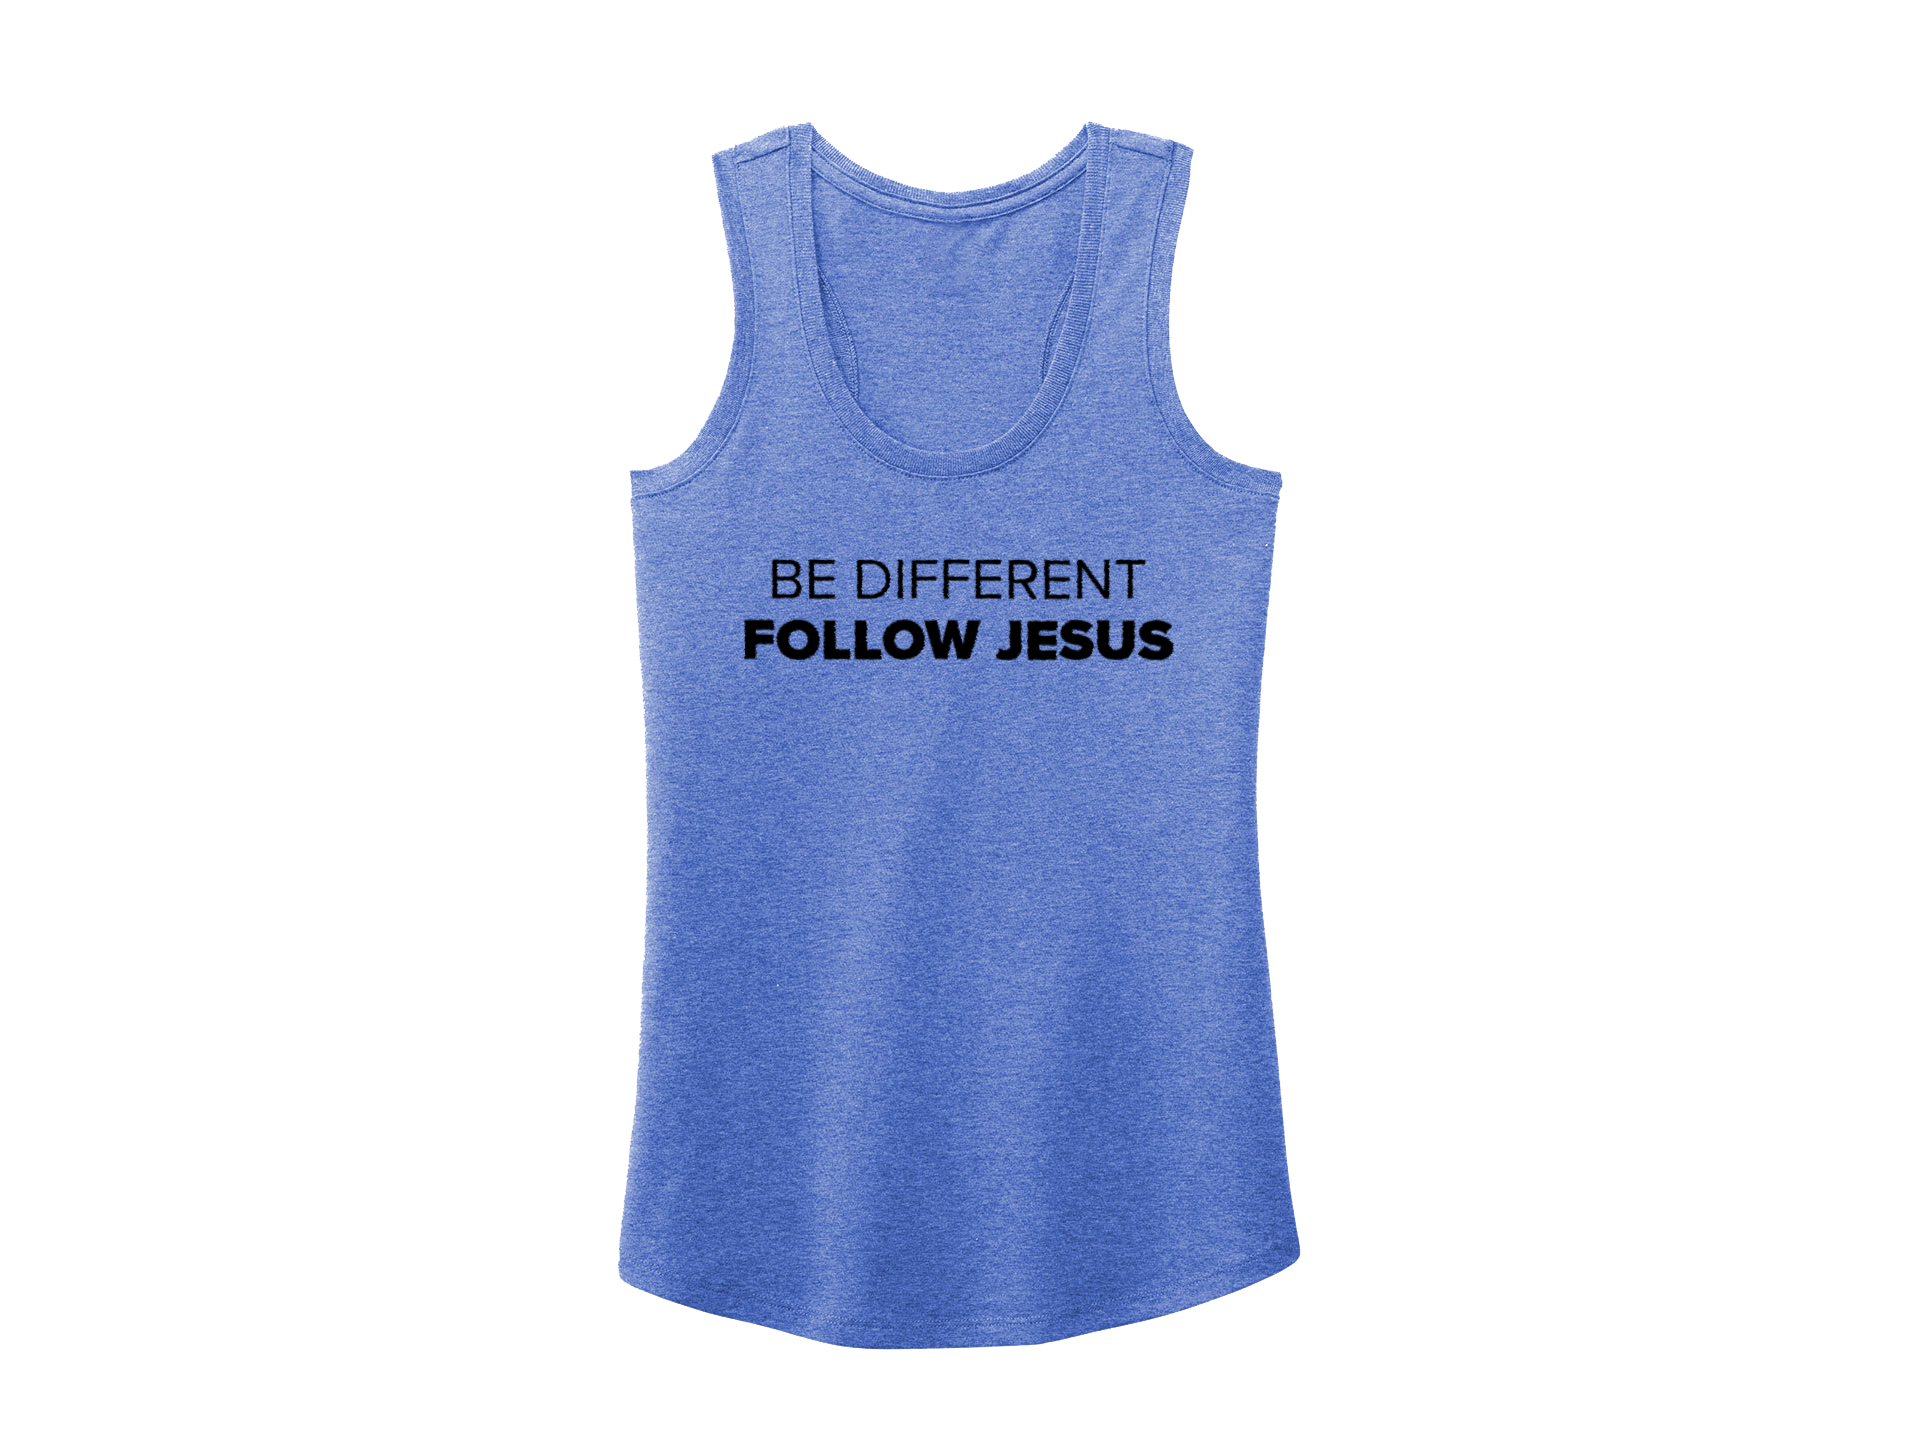 BE DIFFERENT FOLLOW JESUS TANK BLUE - CHRISTIAN CLOTHING